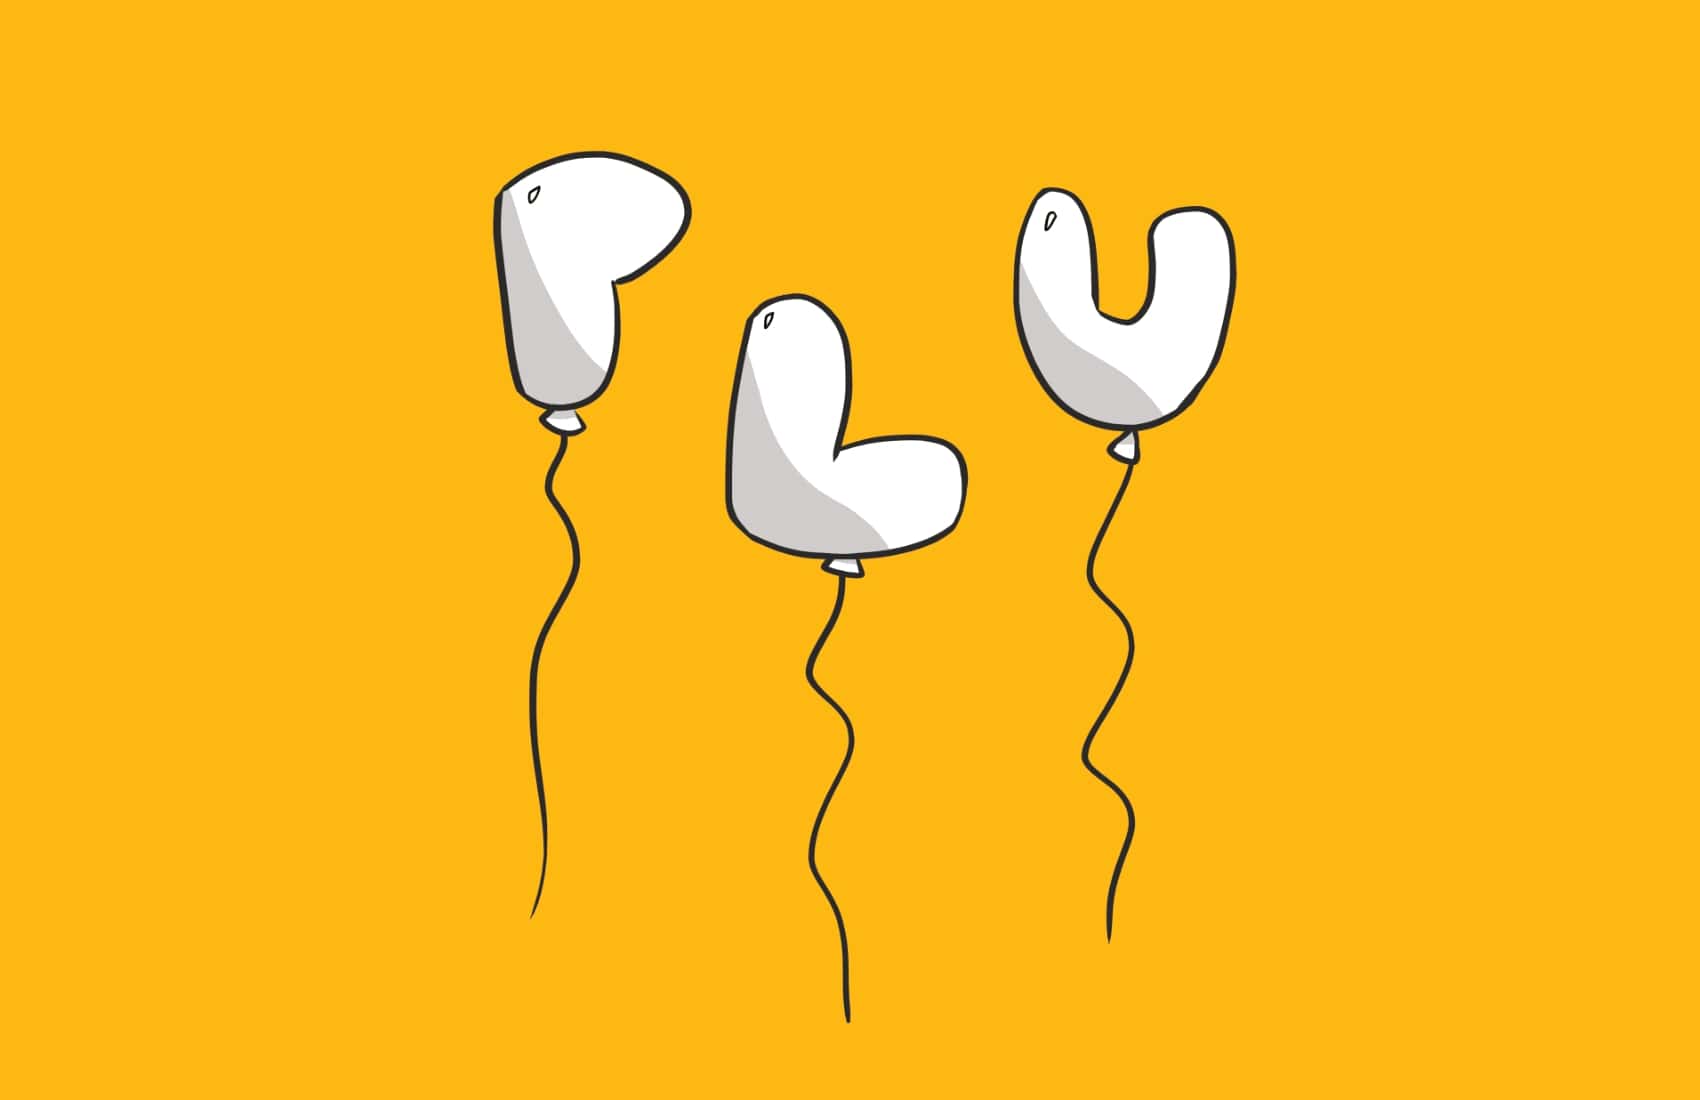 an illustration of the letters 'P' 'L' 'U' as white balloons against a bright mustard yellow plain background